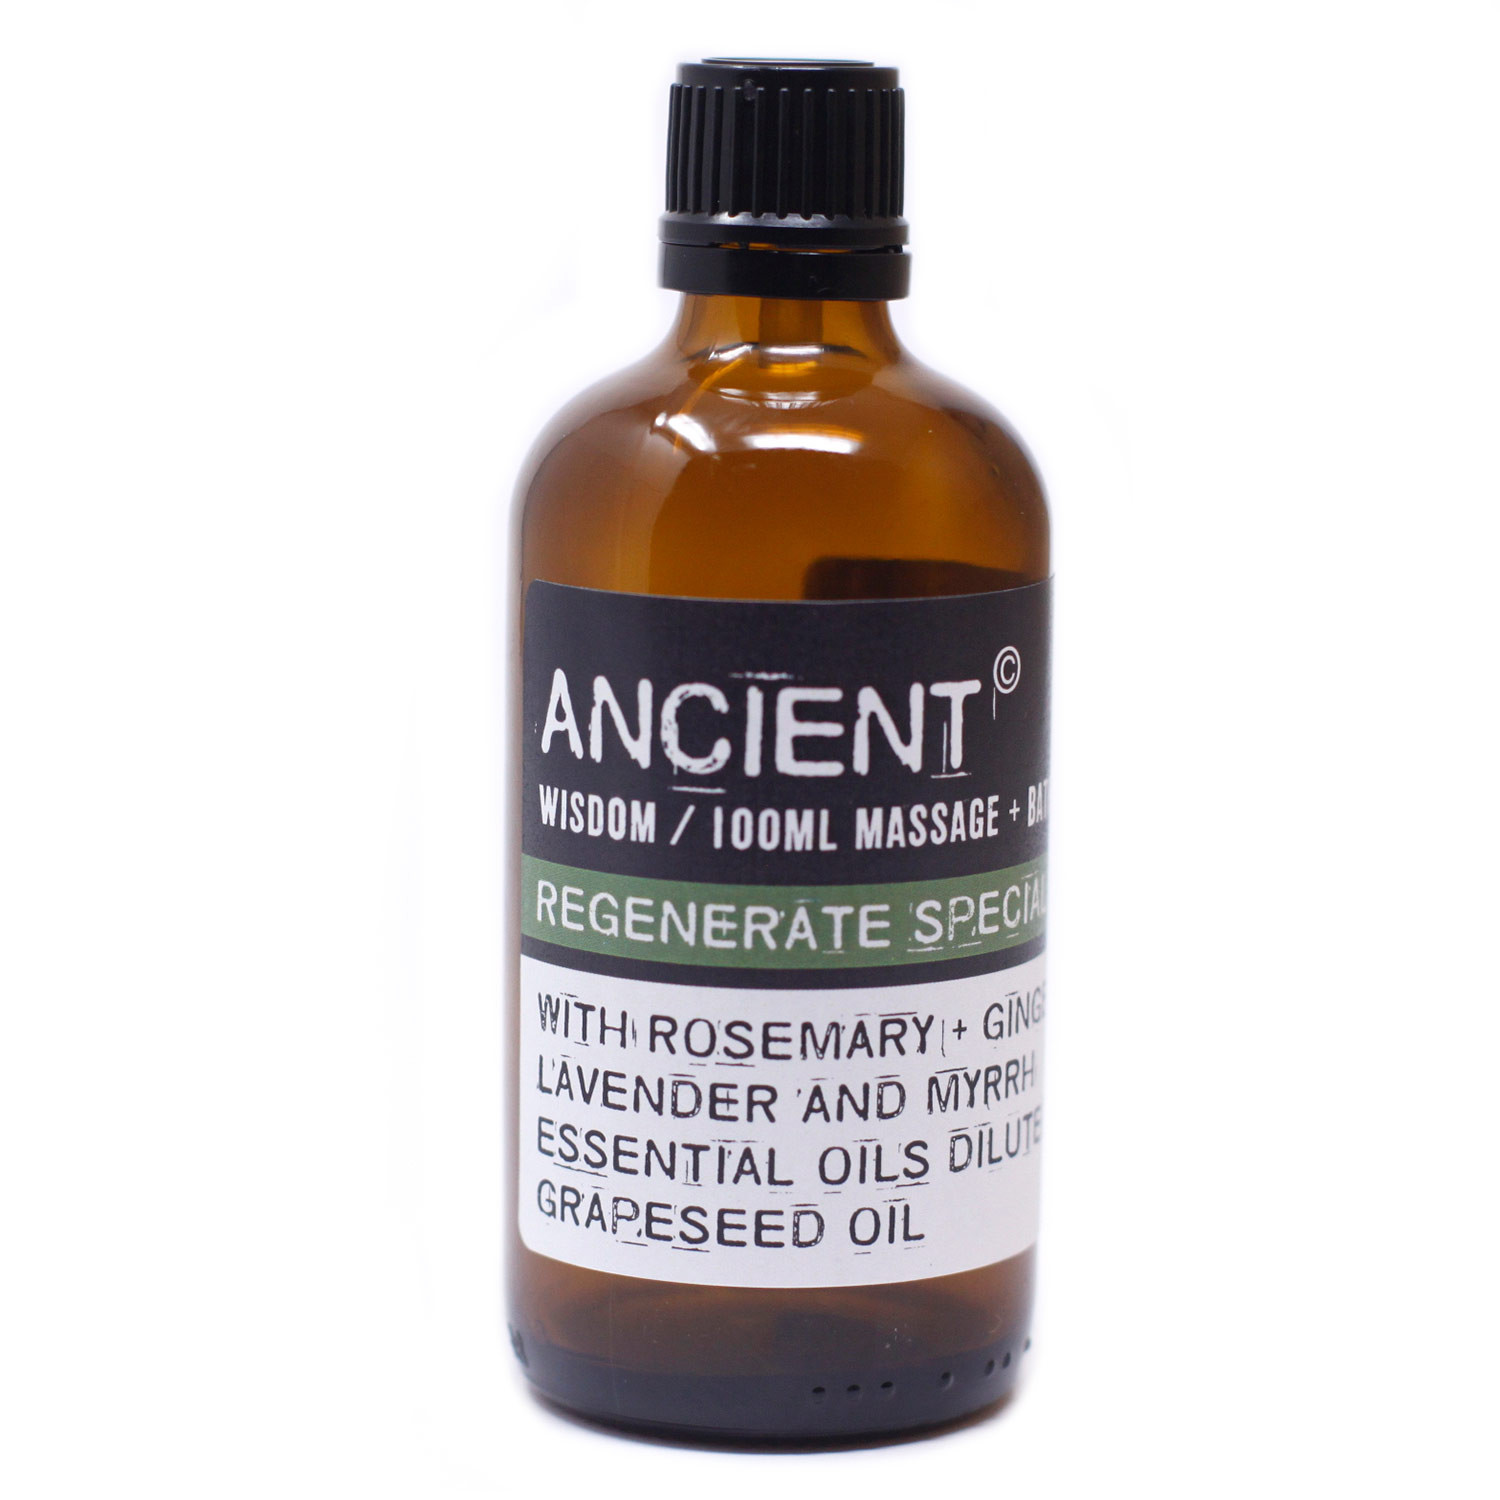 Regenerate Special A2 Mix Massage Oil 100ml - Click Image to Close